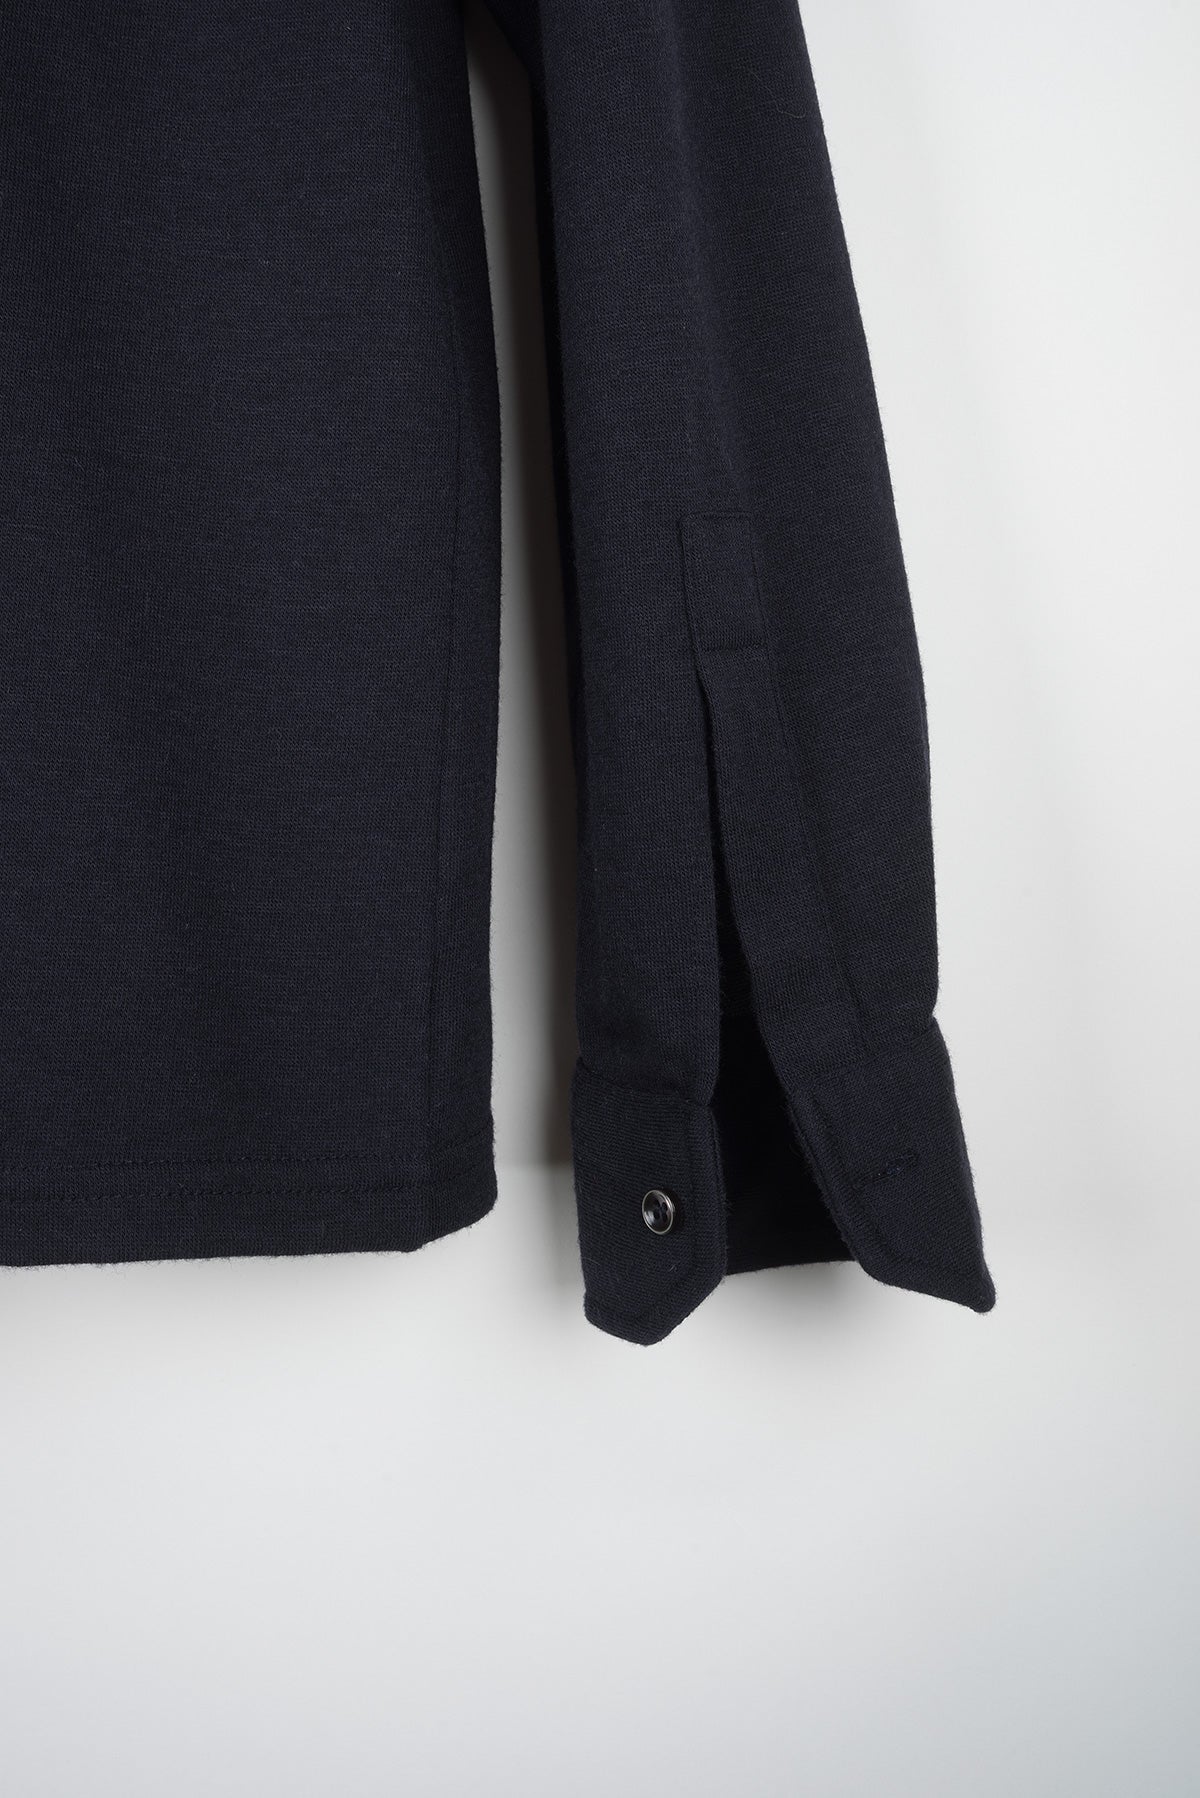 2007 A/W CASHMERE POLO NECK SWEATER WITH CONTRASTING COLLAR